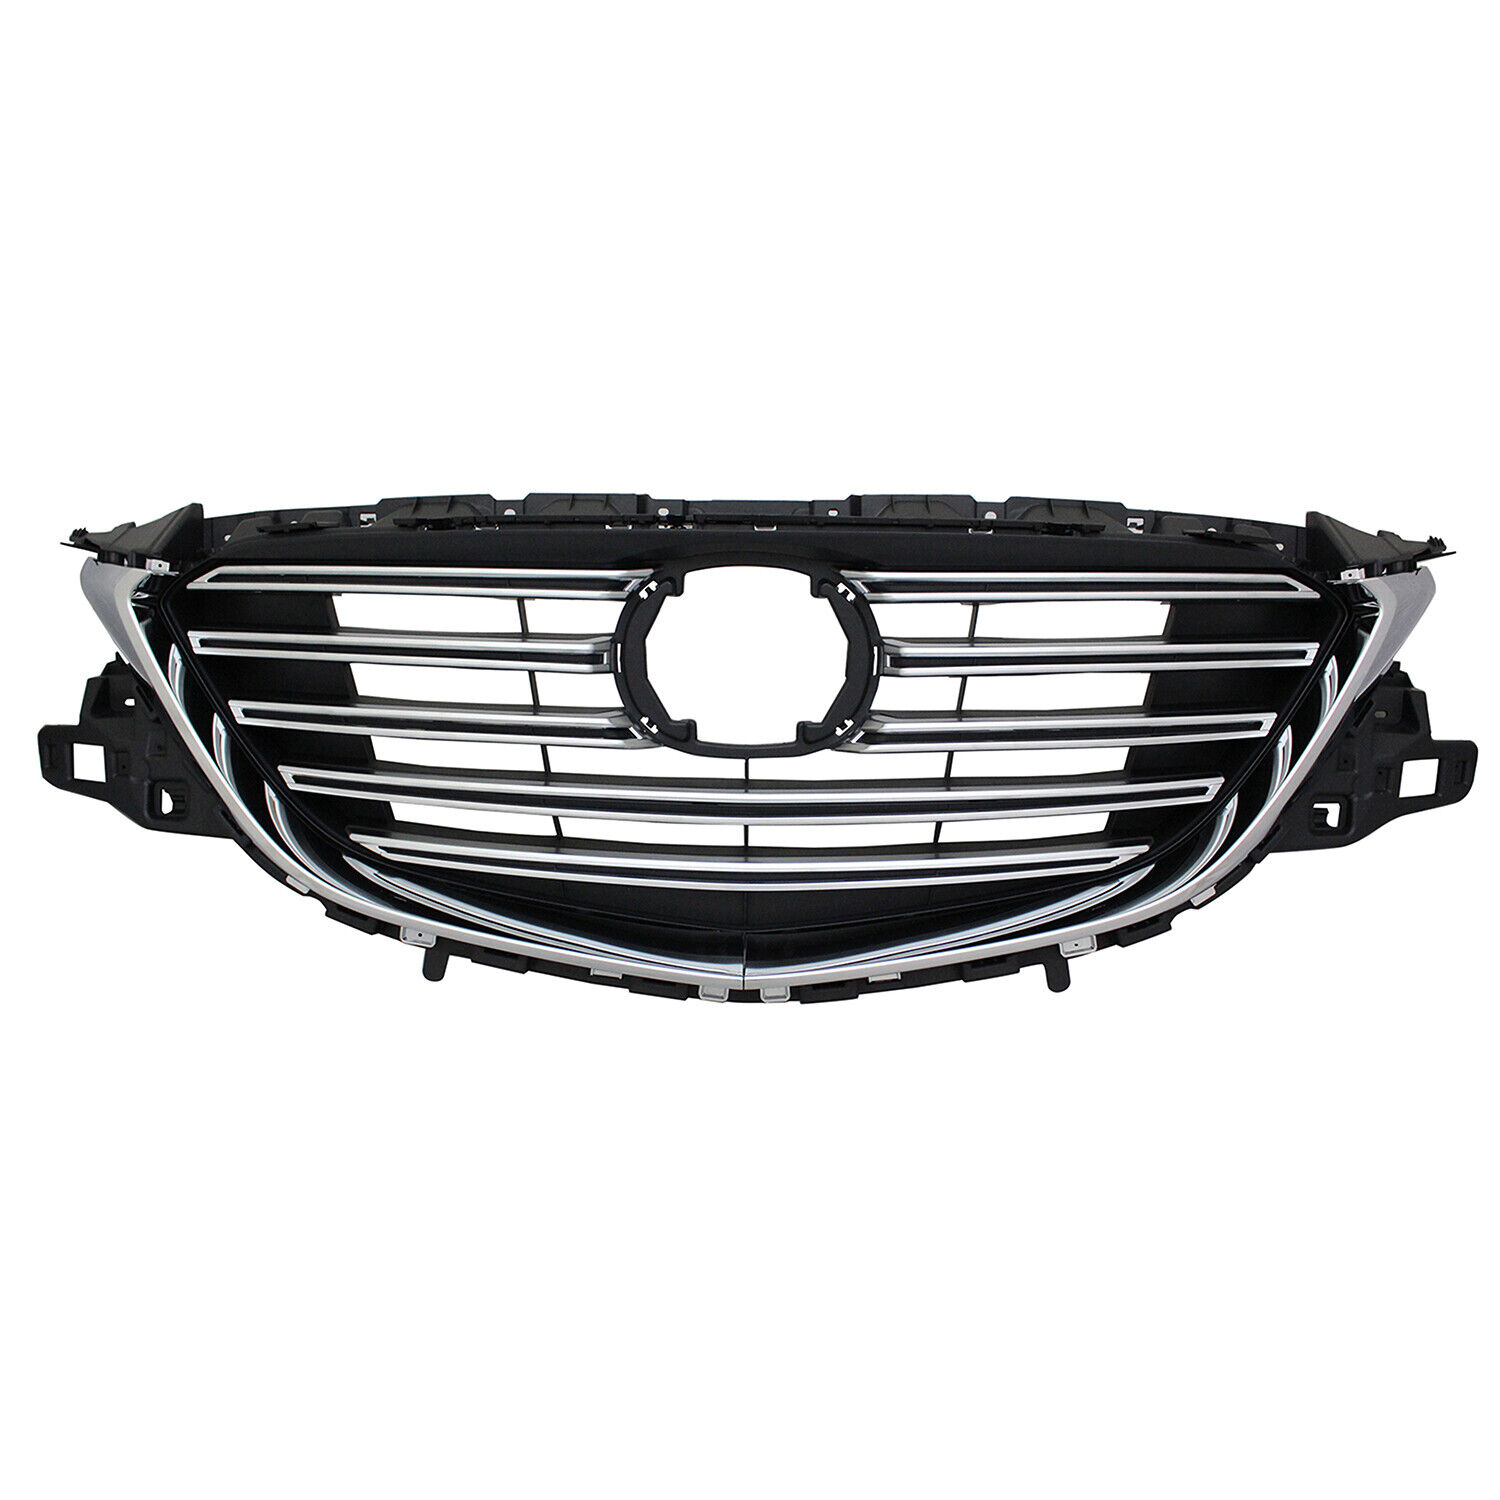 MA1200211 New Grille Fits 2016-2018 Mazda CX9 GS/GS-L/Sport/Touring